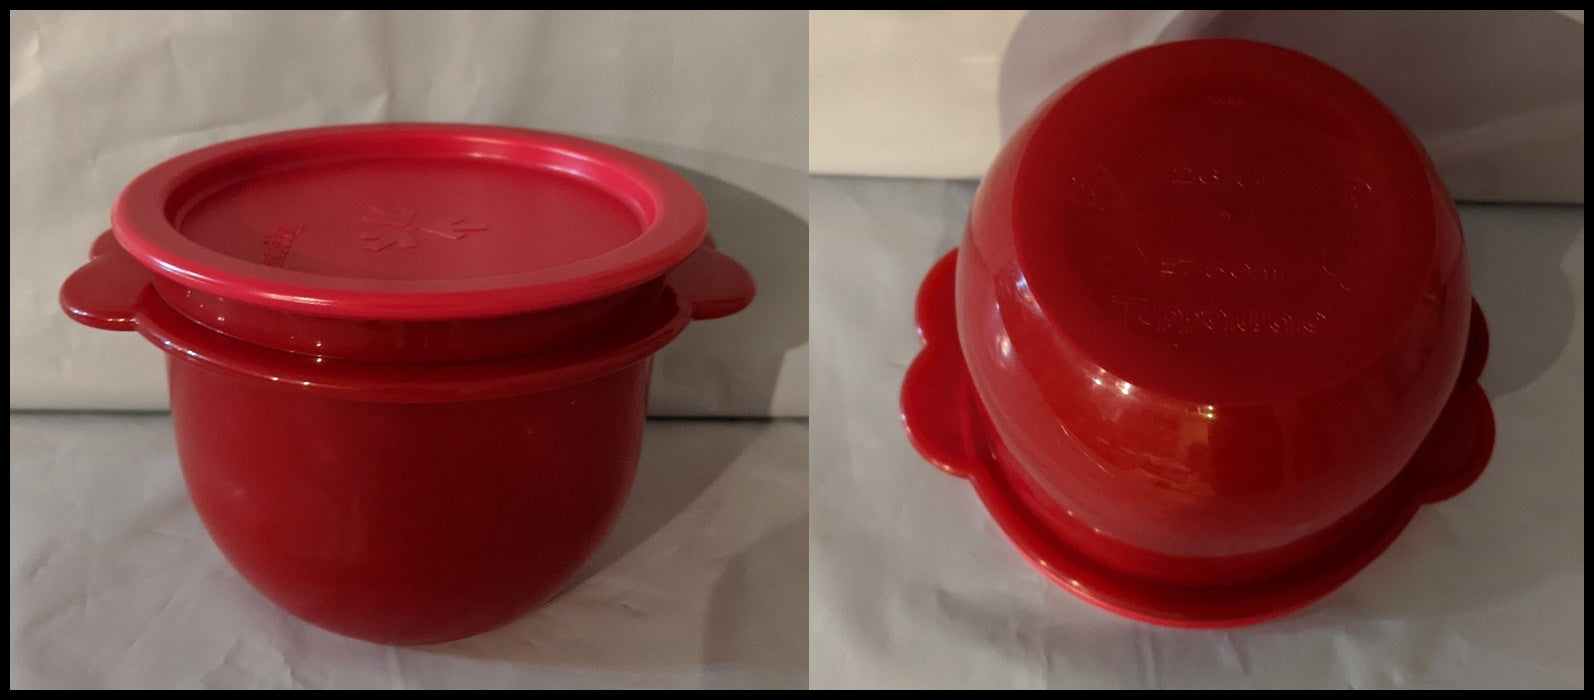 TUPPERWARE LOT TWO (2) Flat Bottom Nesting Mixing Bowls 3.25 / 750 mL w/ RED SEALS